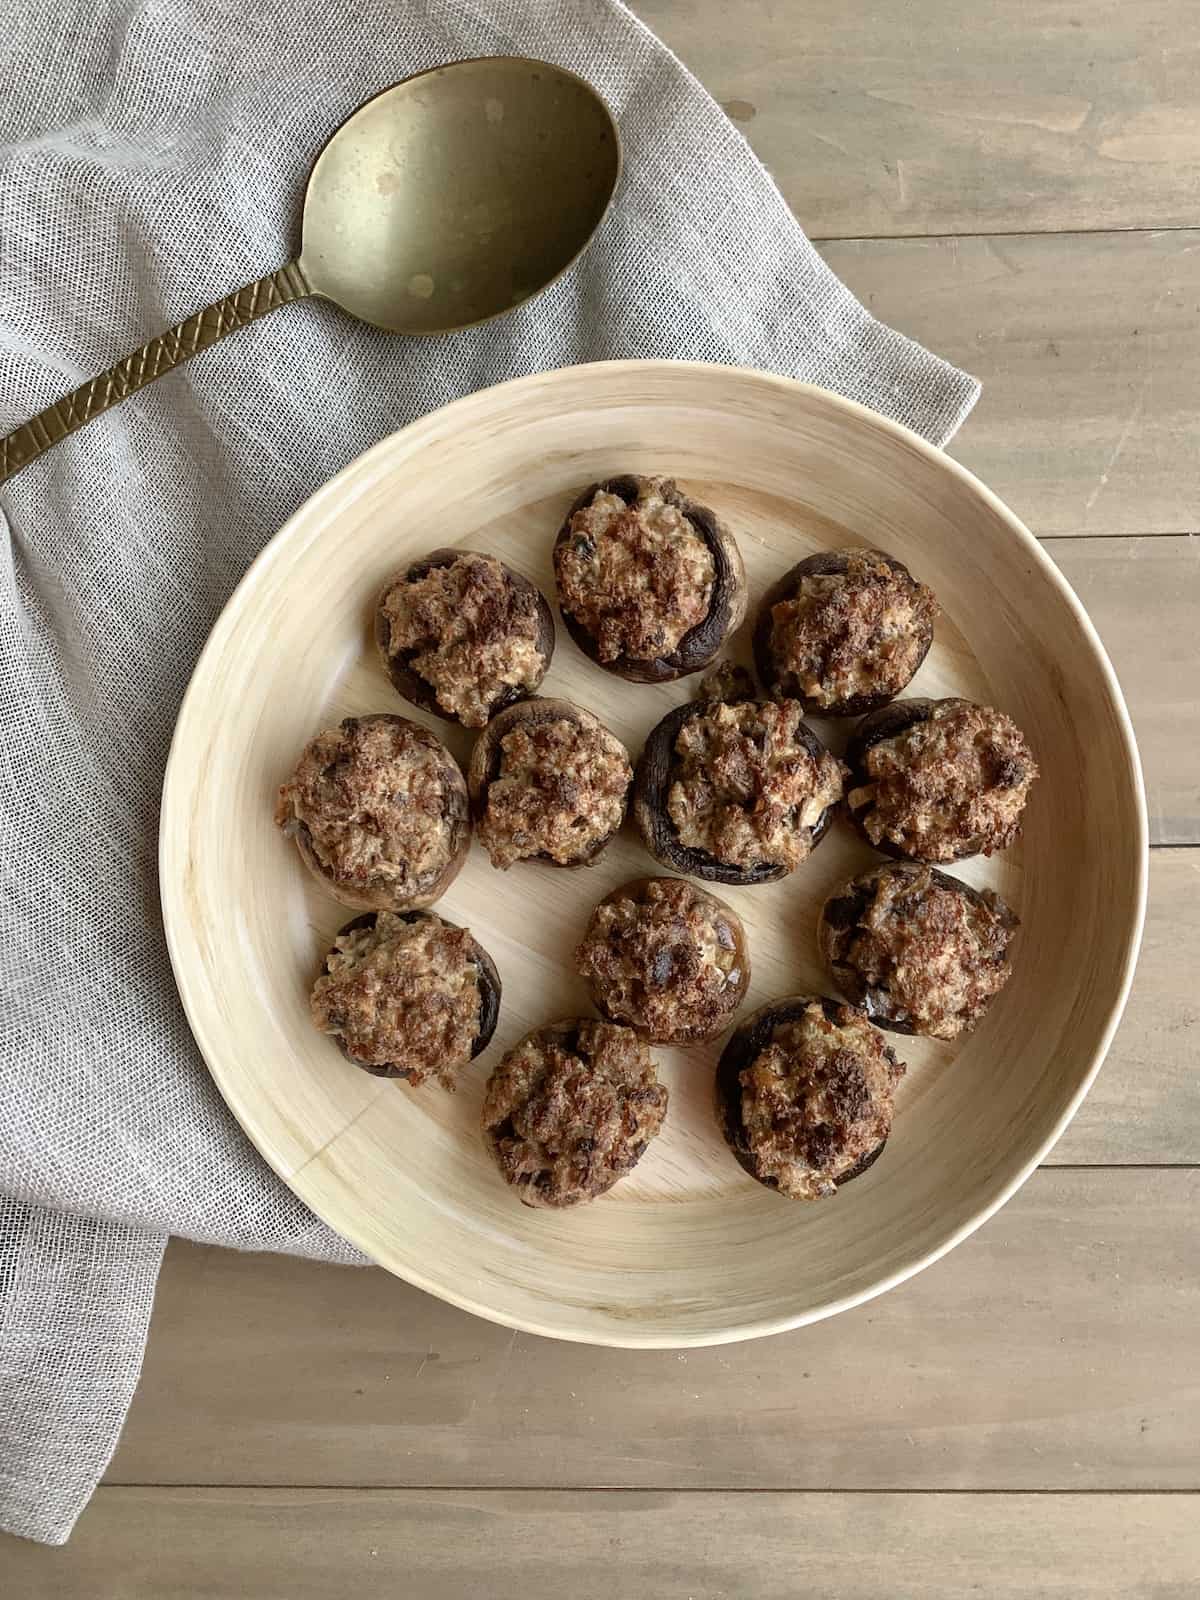 Stuffed Mushrooms in a bamboo bowl with a beige napkin.